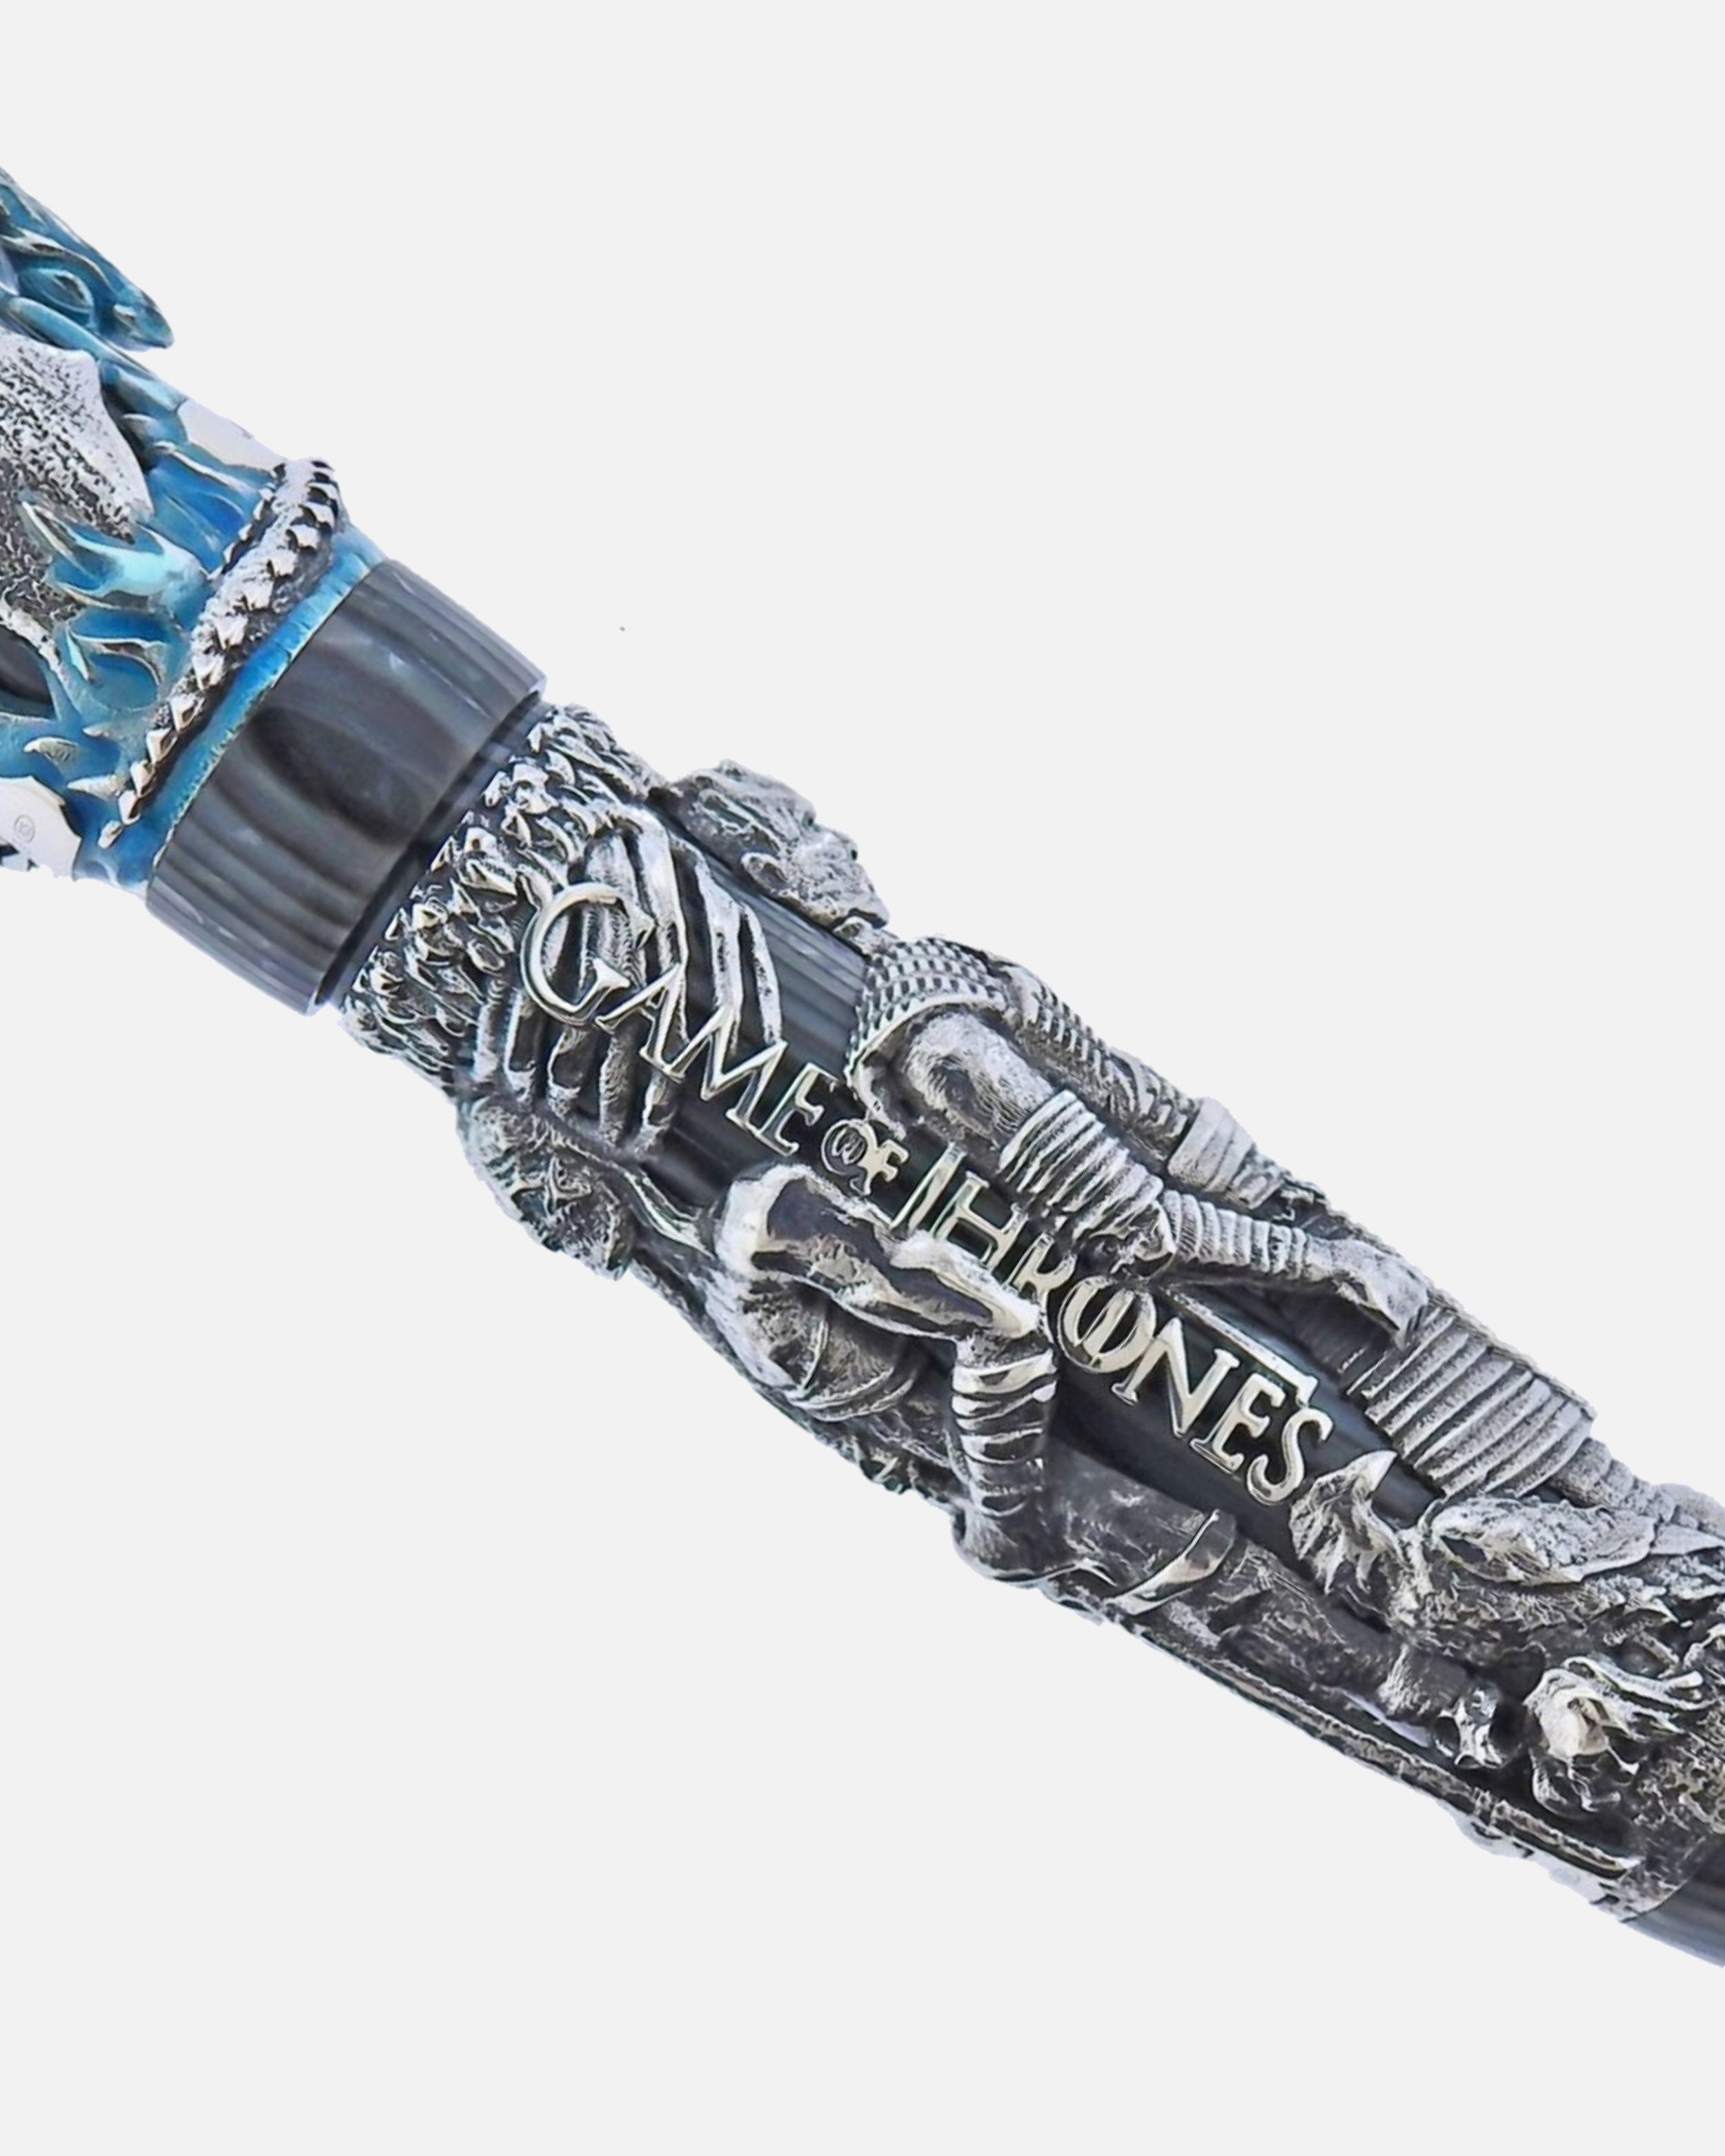 Montegrappa Game of Thrones "Winter is Here" Limited Edition